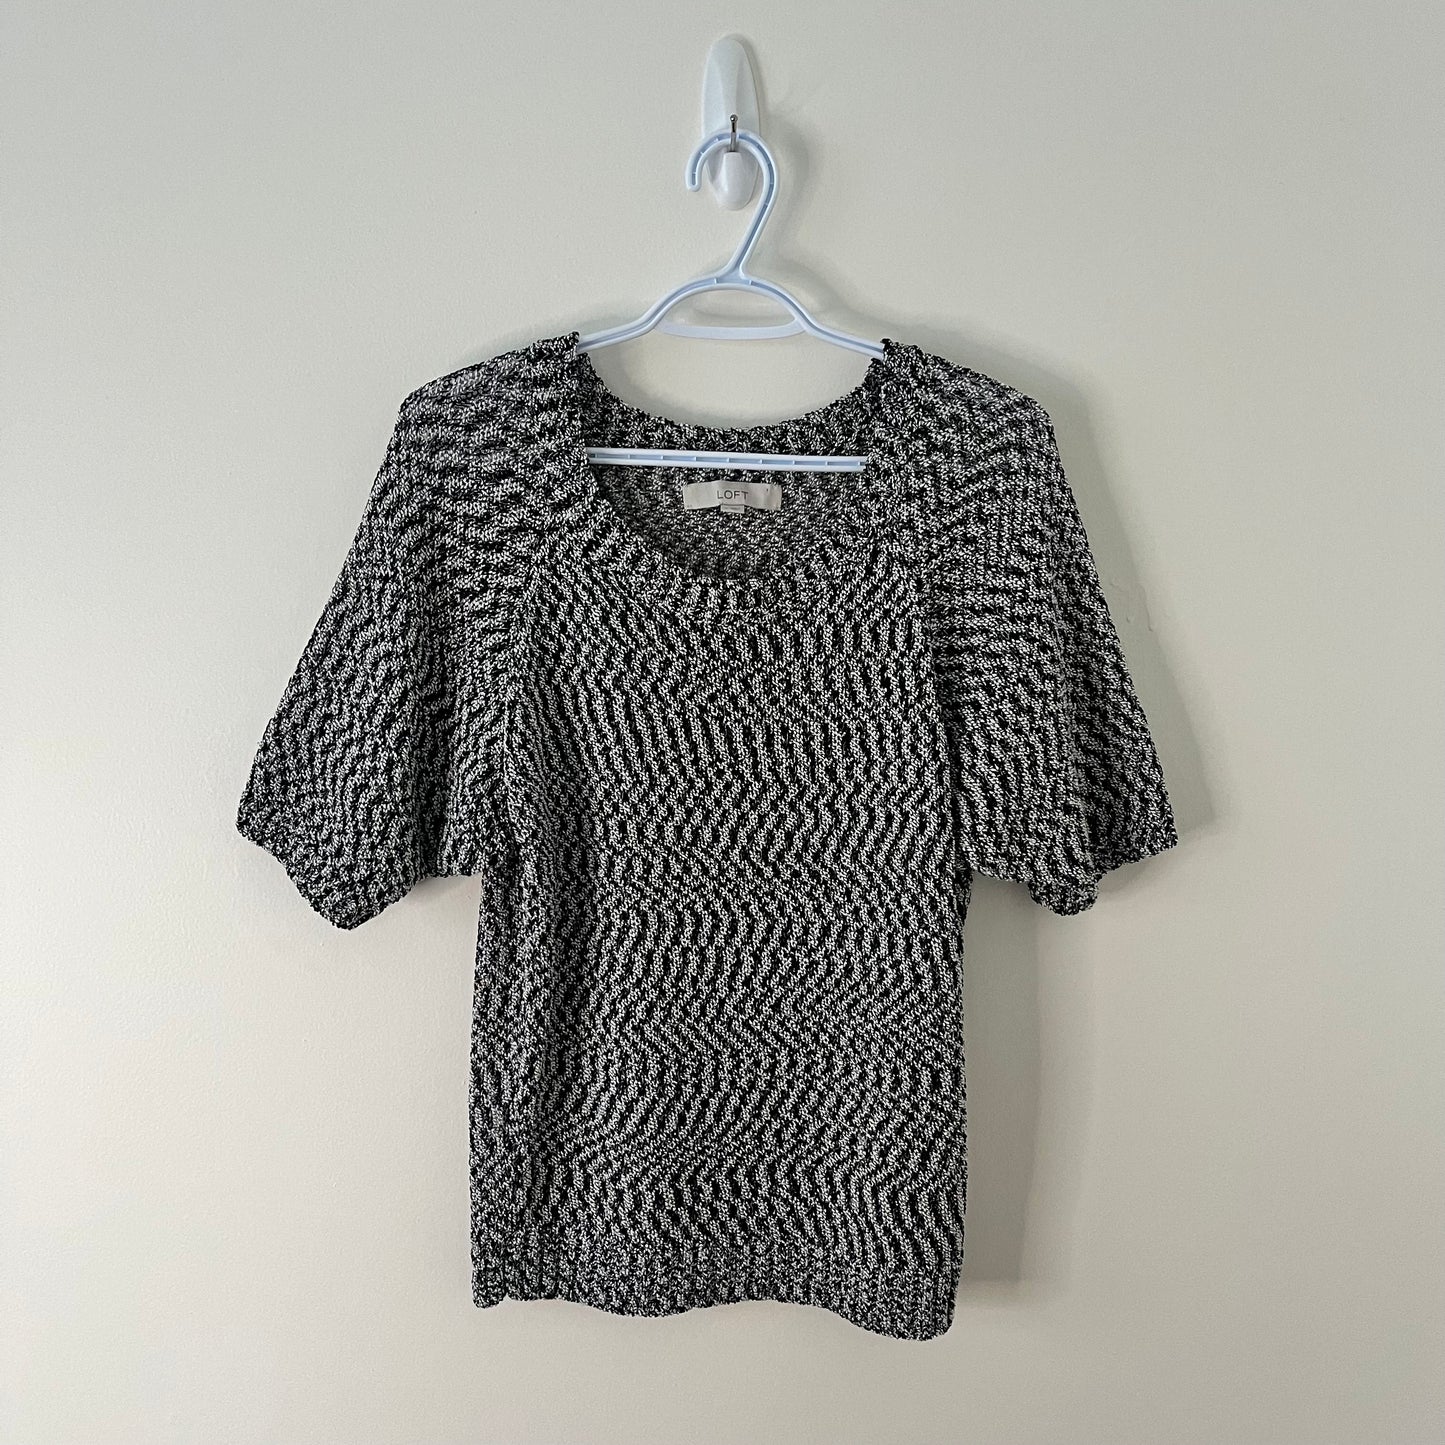 Black + White Knit Tee with Silver Accents (M)